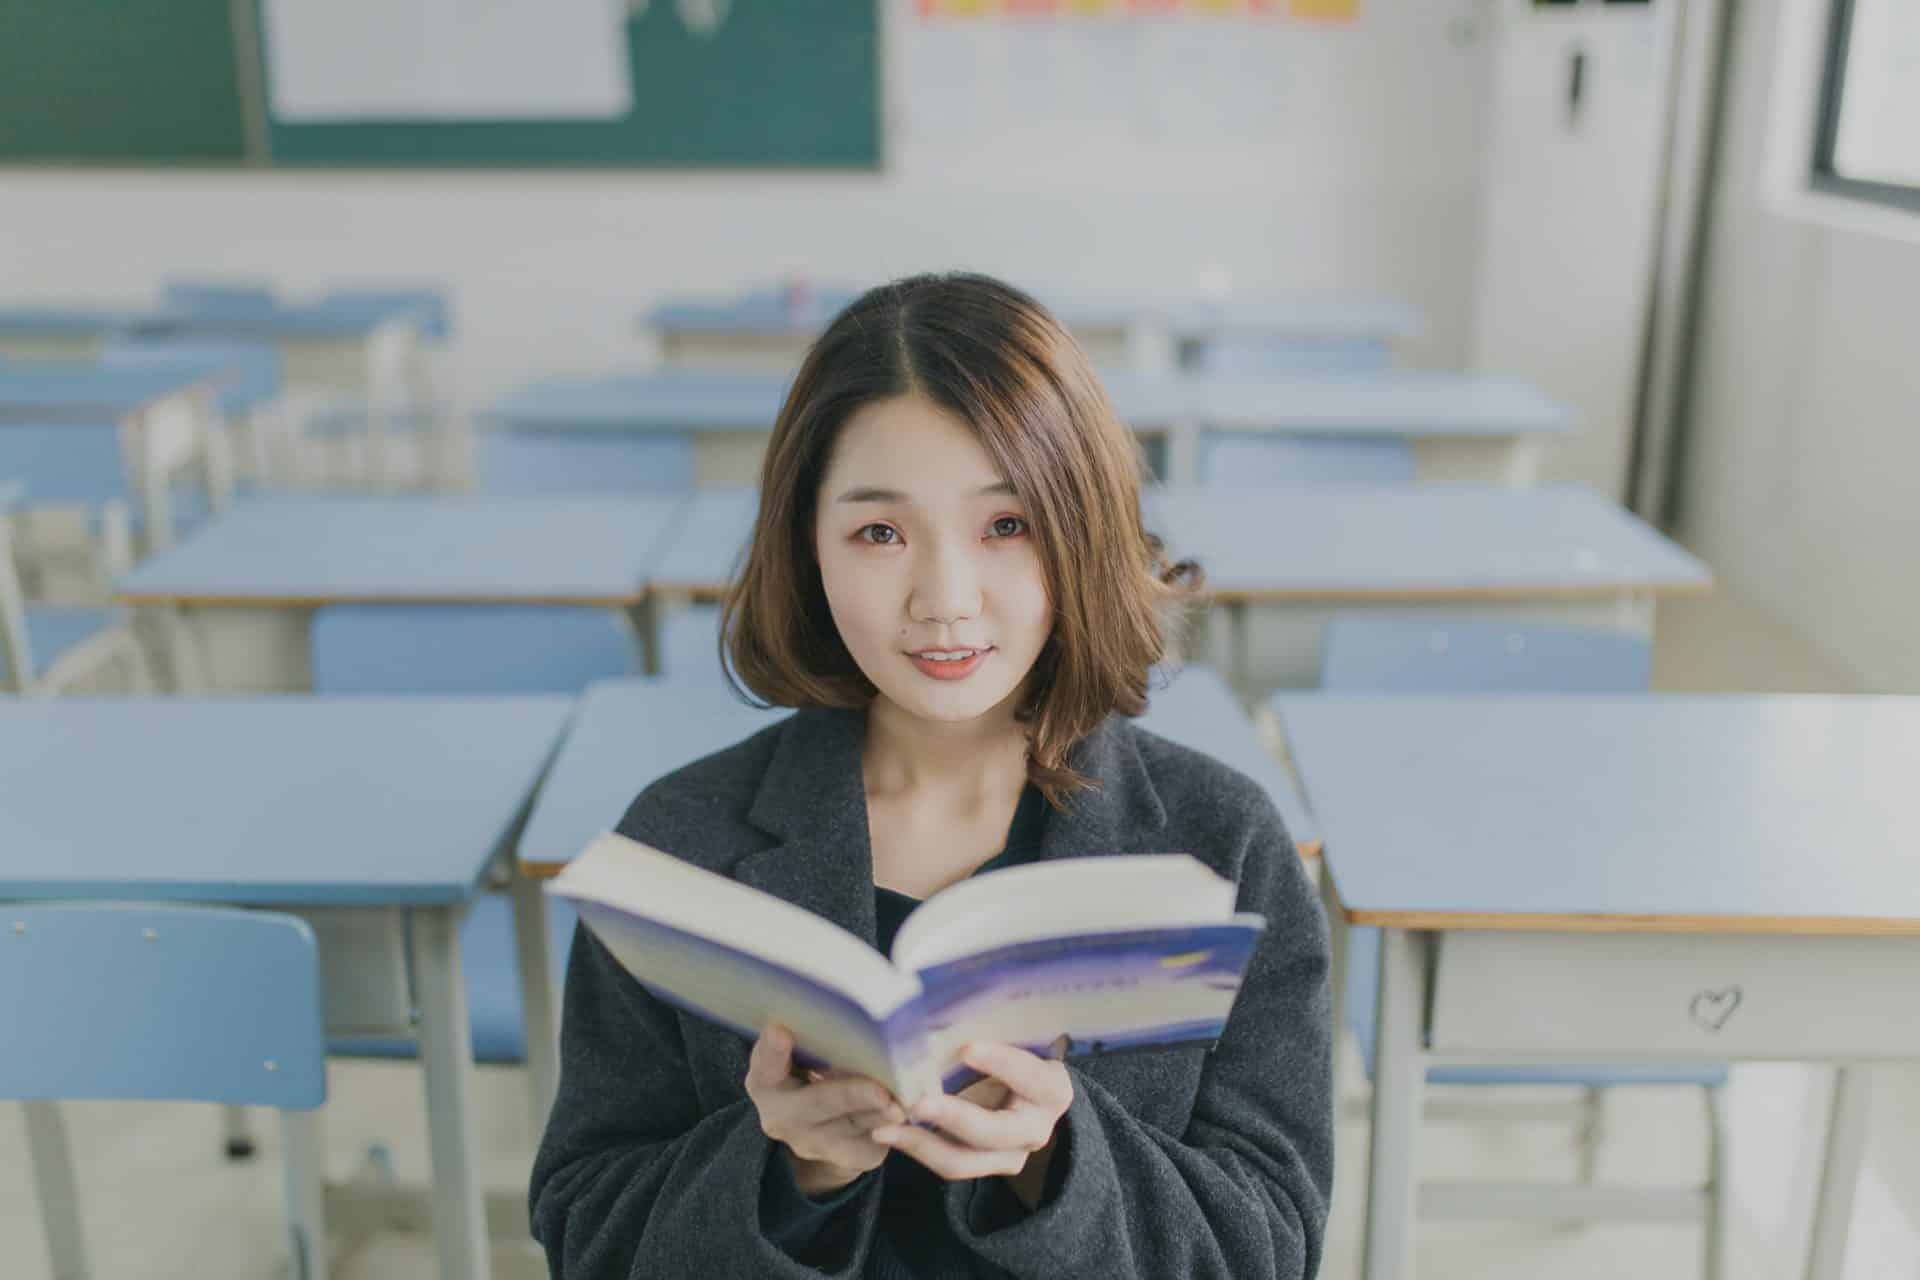 A lady sitting in a classroom with an open book